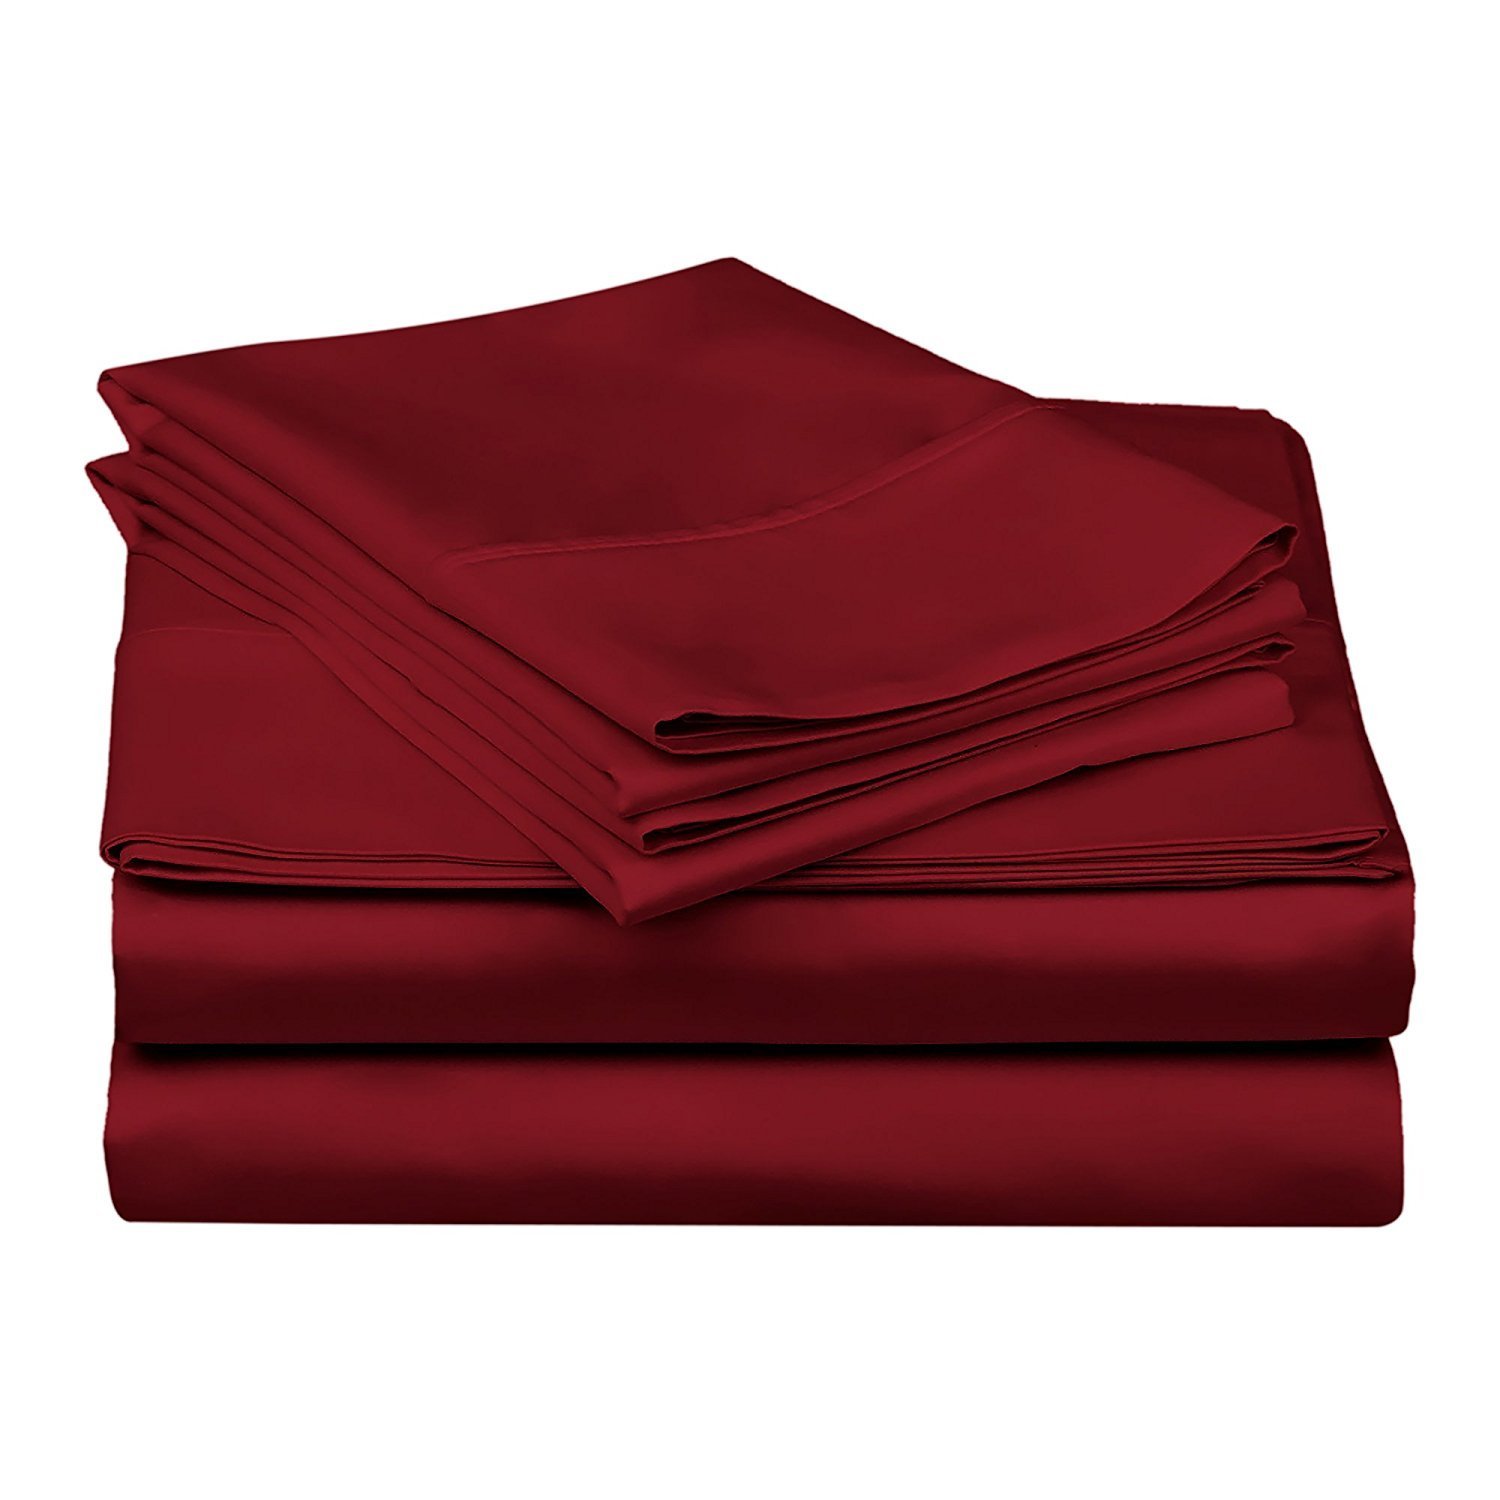 GoLinens Luxury 600 Thread Count 100% Certified Extra Long Staple Premium Combed Cotton Bed Sheet Set - Plain- Burgundy